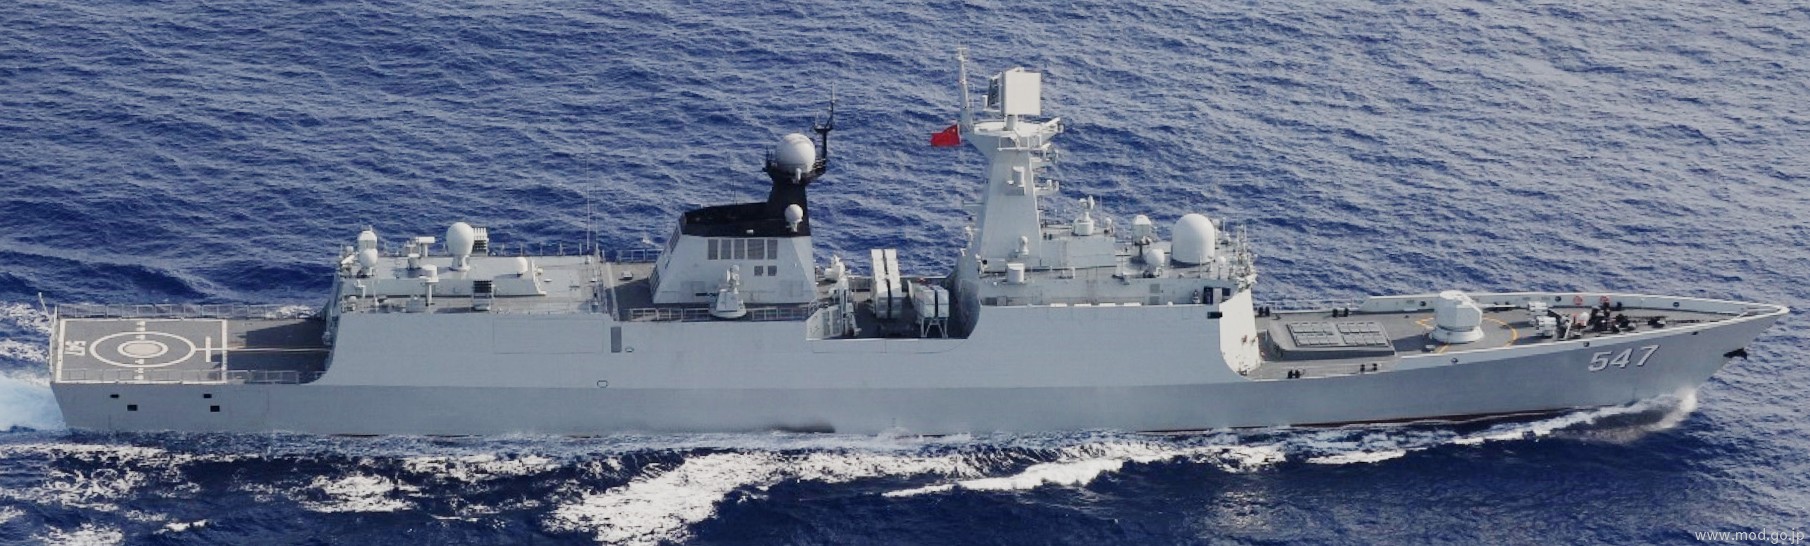 ffg-547 plans linyi type 054a jiangkai ii class guided missile frigate china people's liberation army navy 04